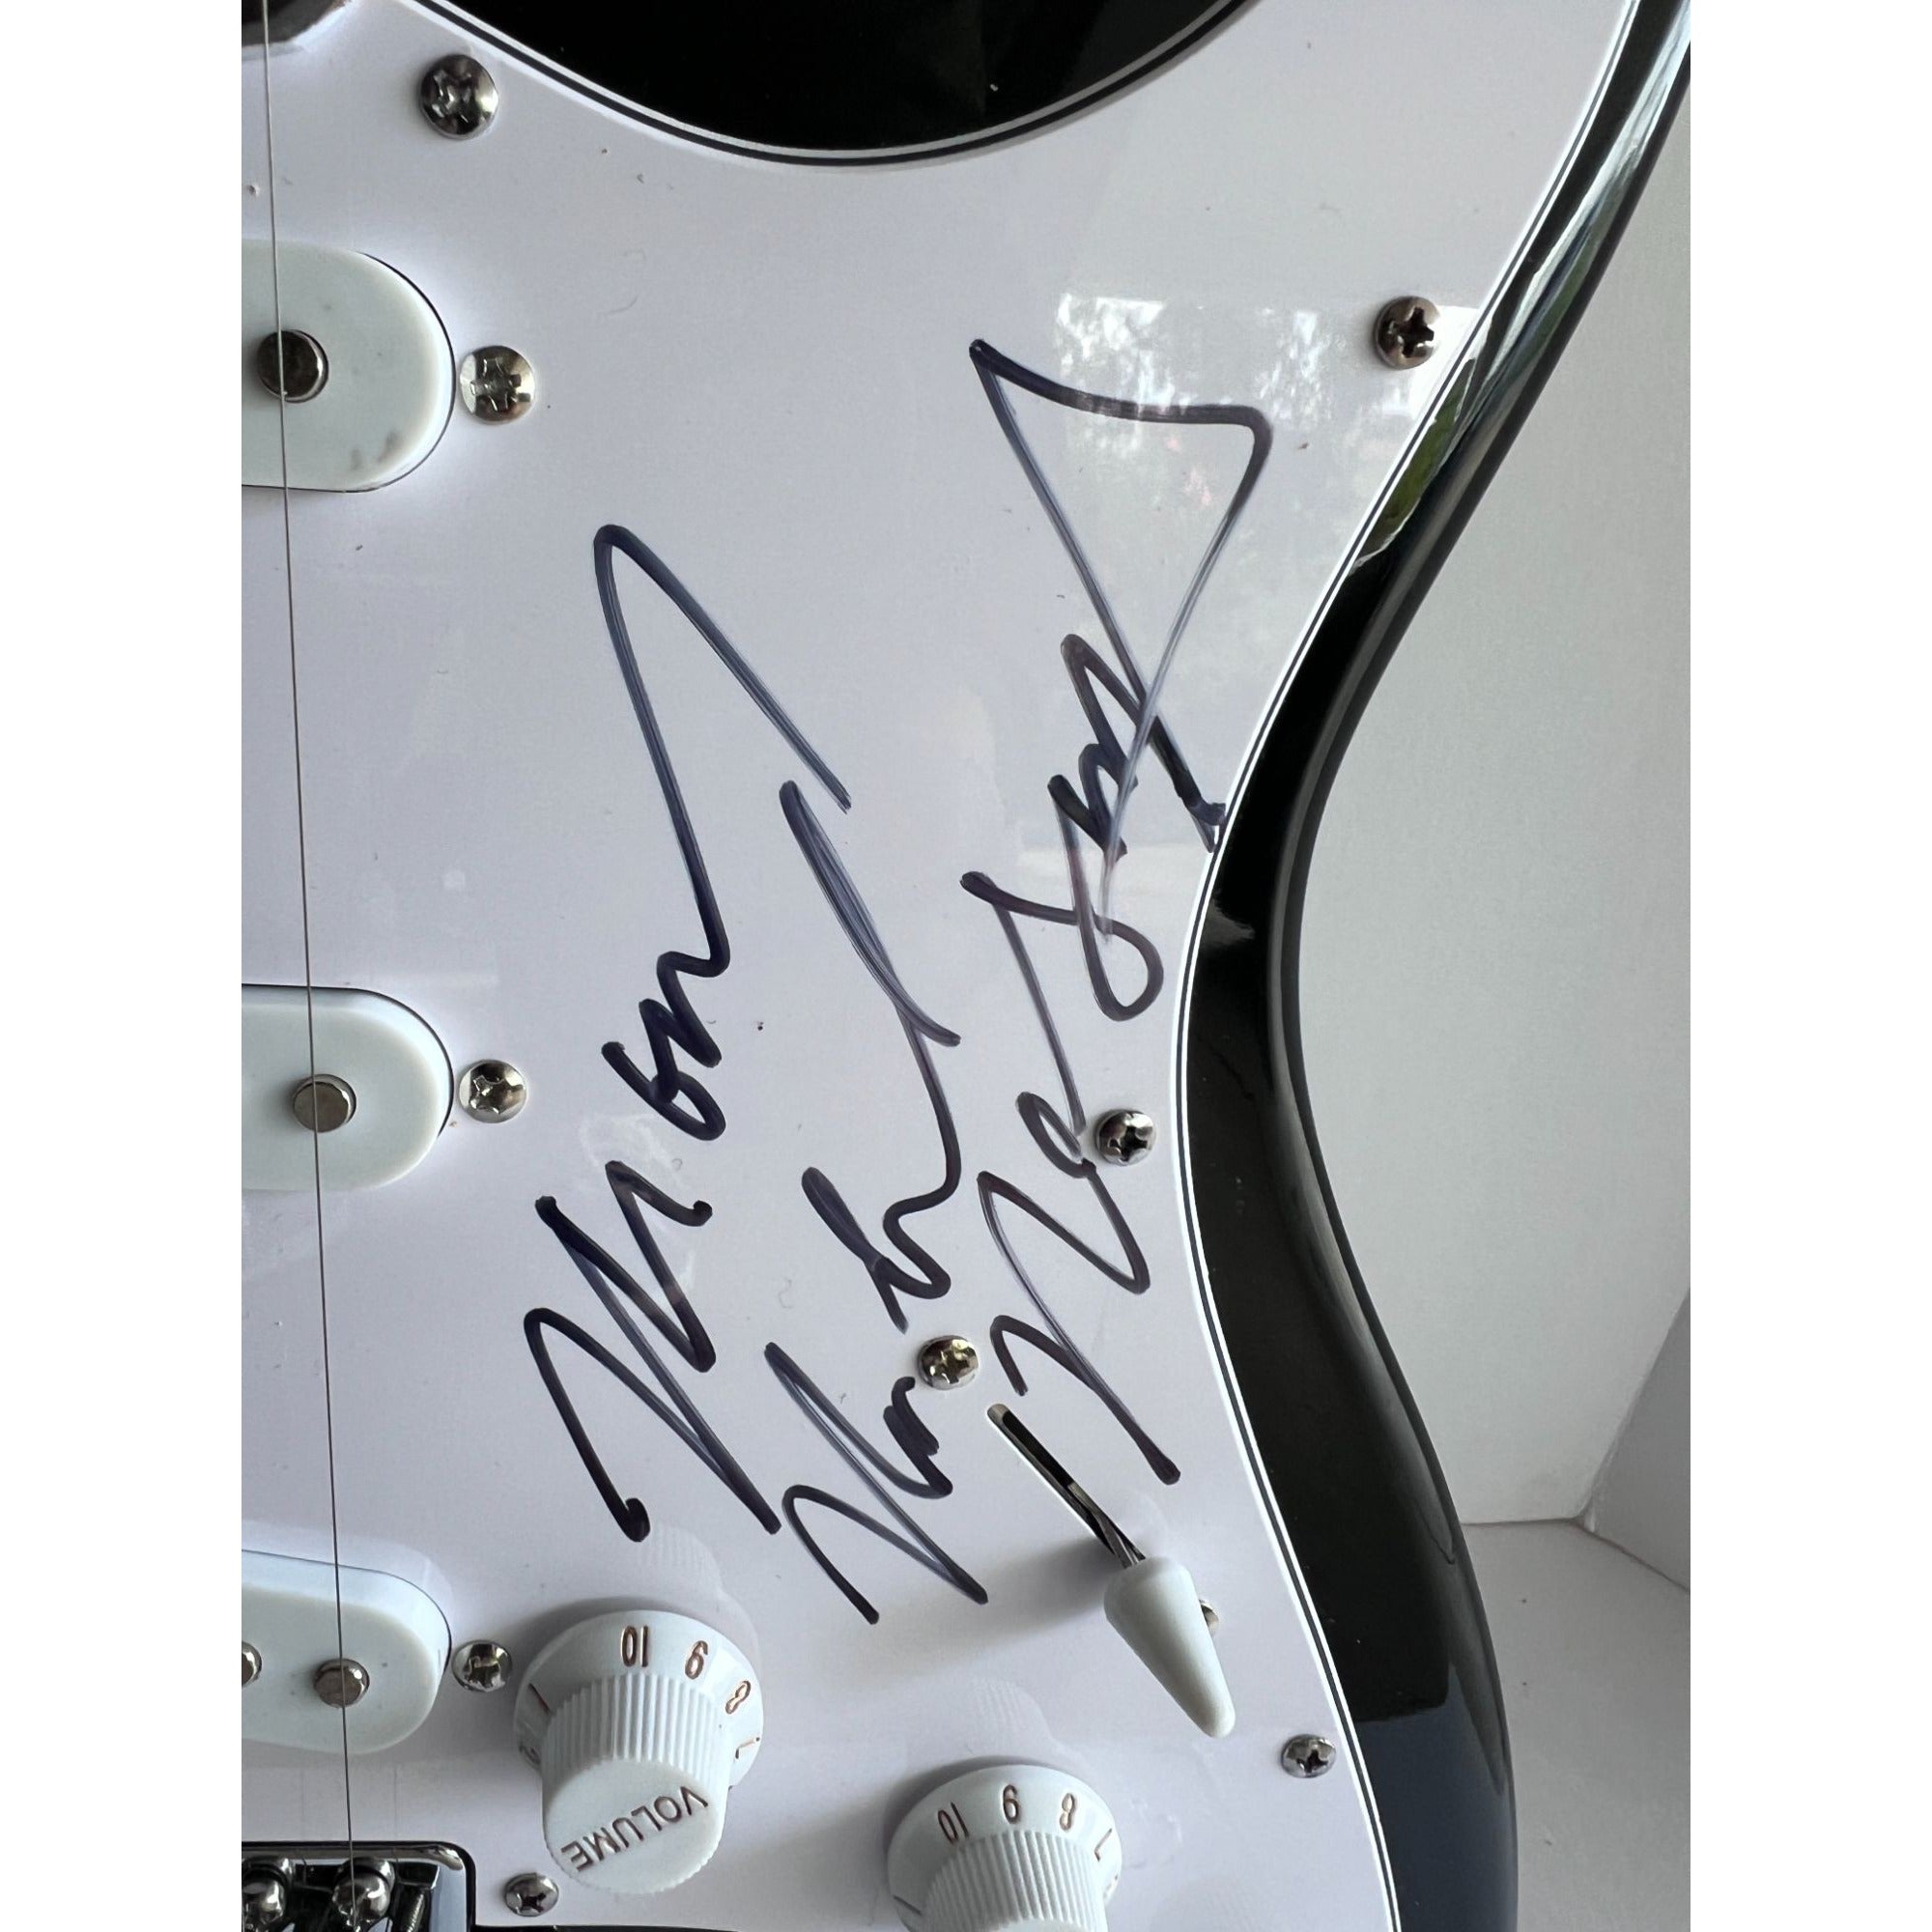 The Monkees Michael Nesmith, Peter Tork, Micky Dolenz, and Davey Jones full size Stratocaster electric guitar signed with proof